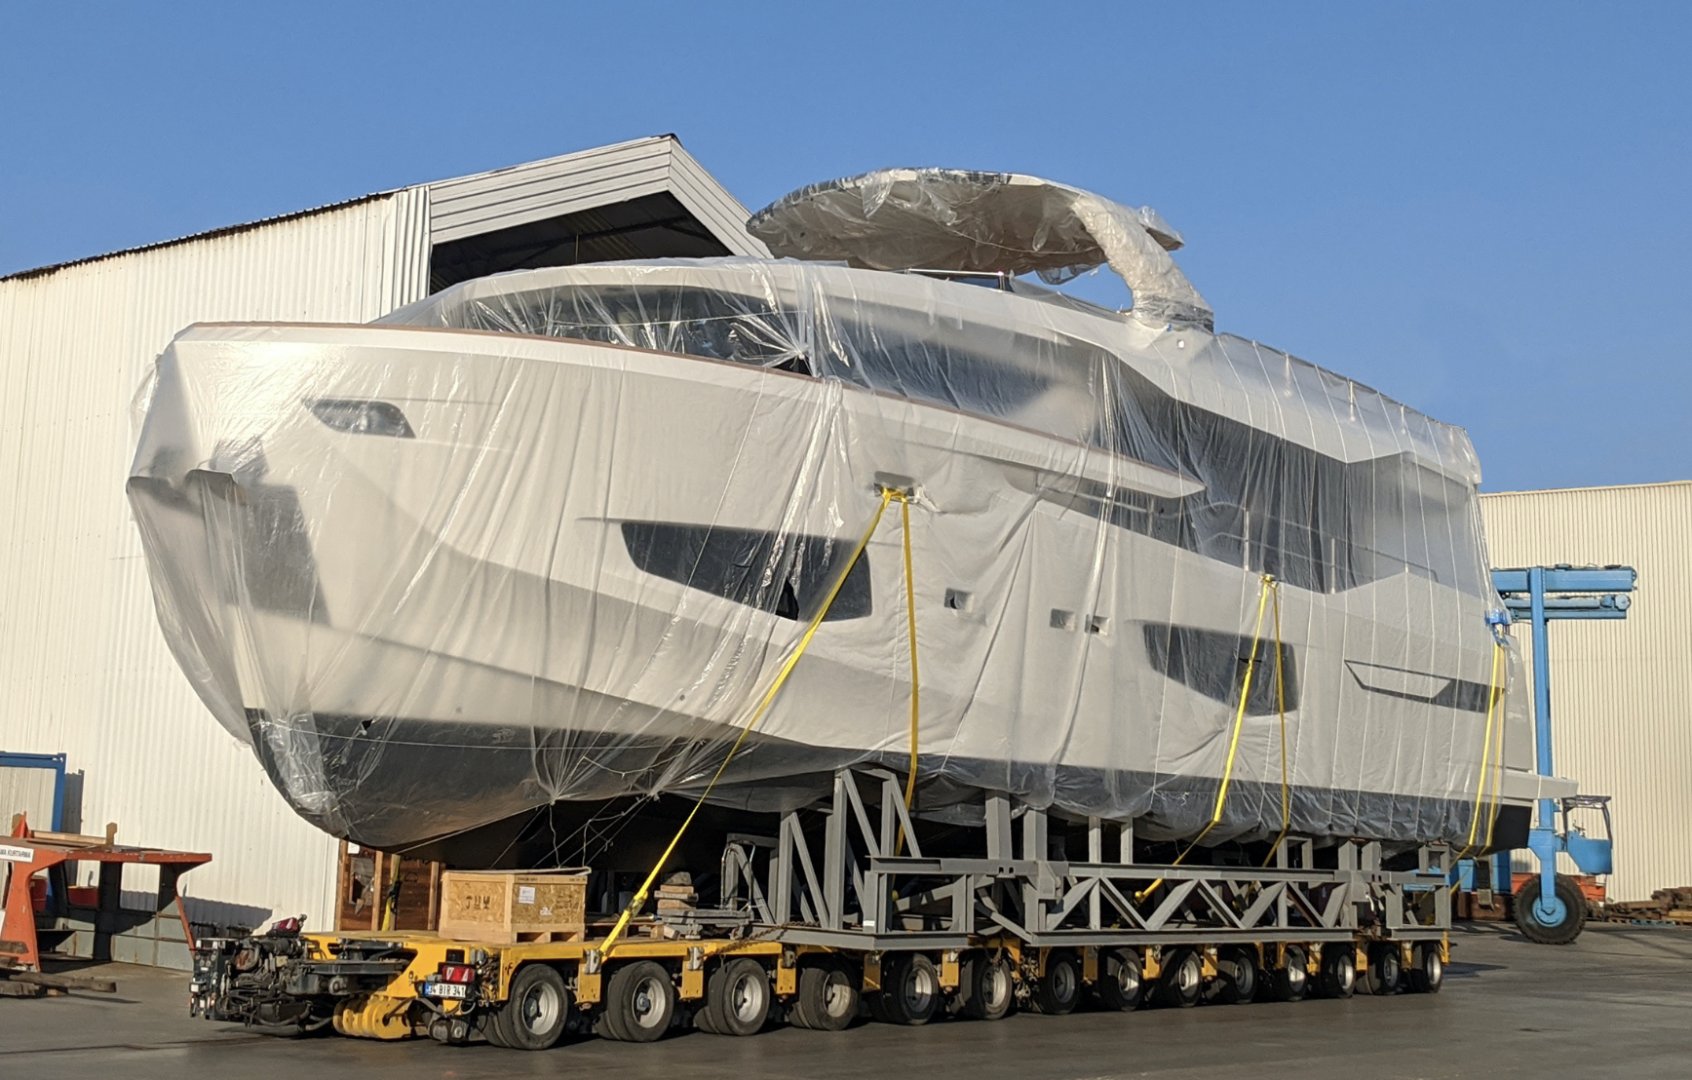 Numarine delivered two more 26XP model, expedition yachts